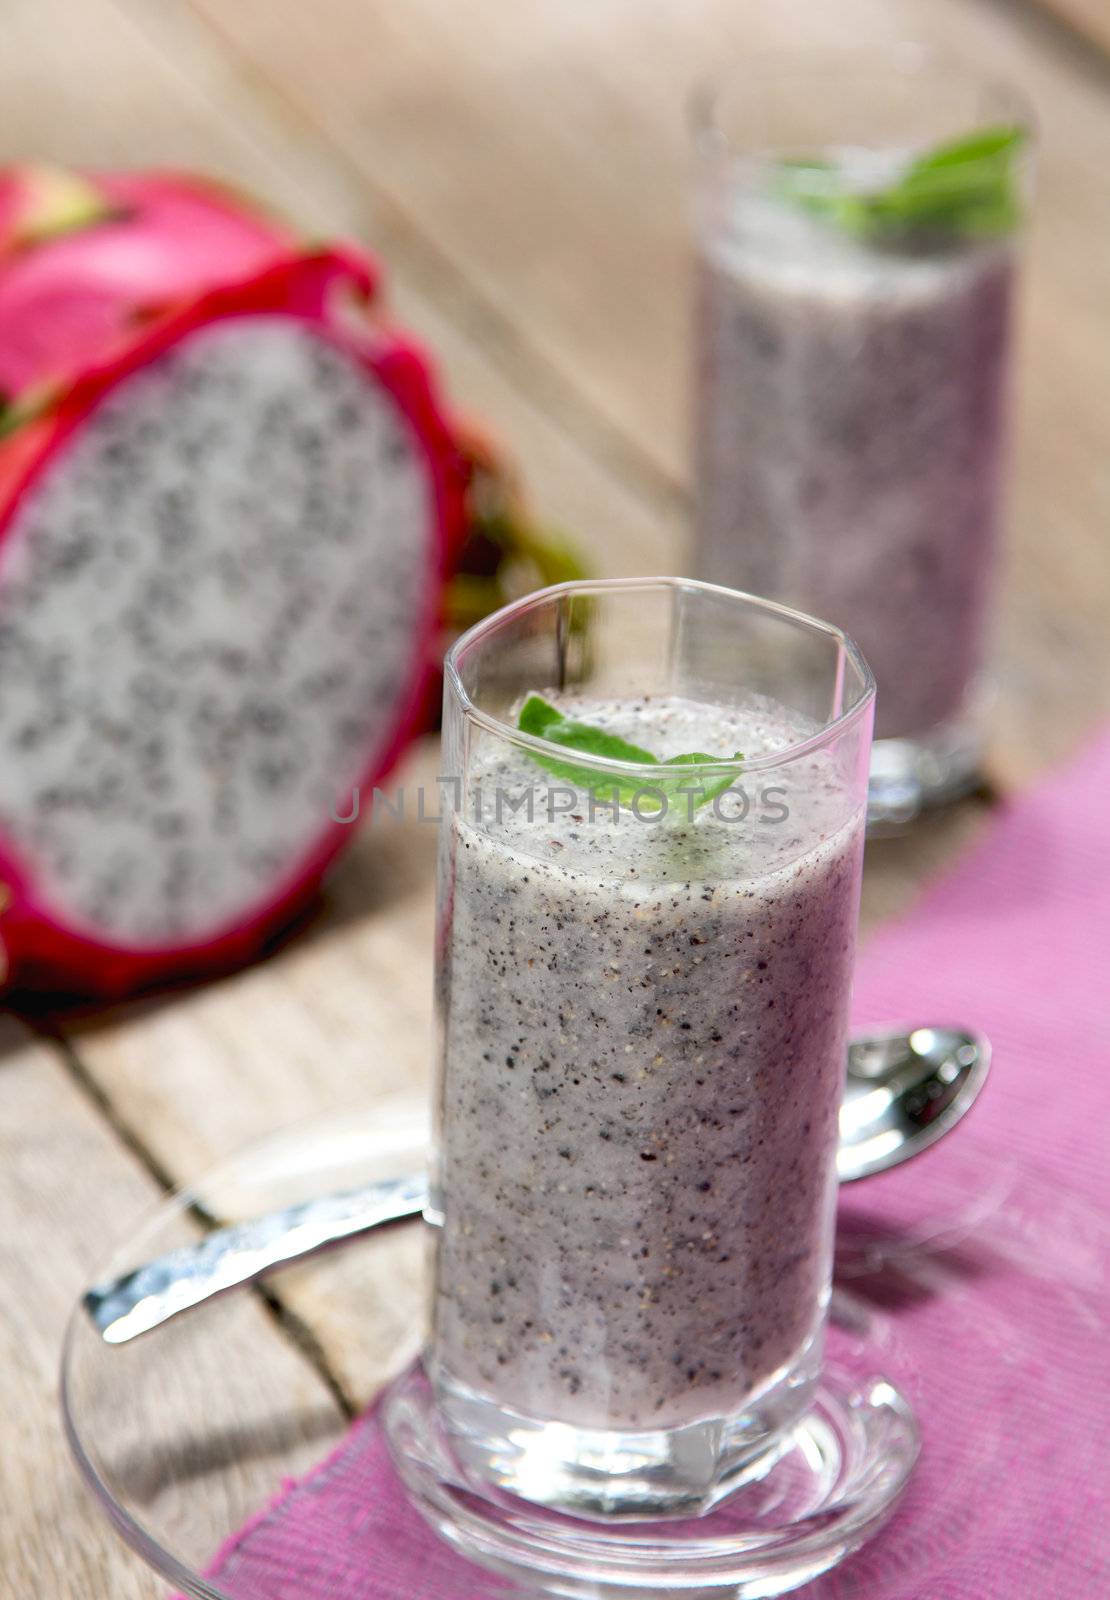 Dragon fruit smoothie by vanillaechoes